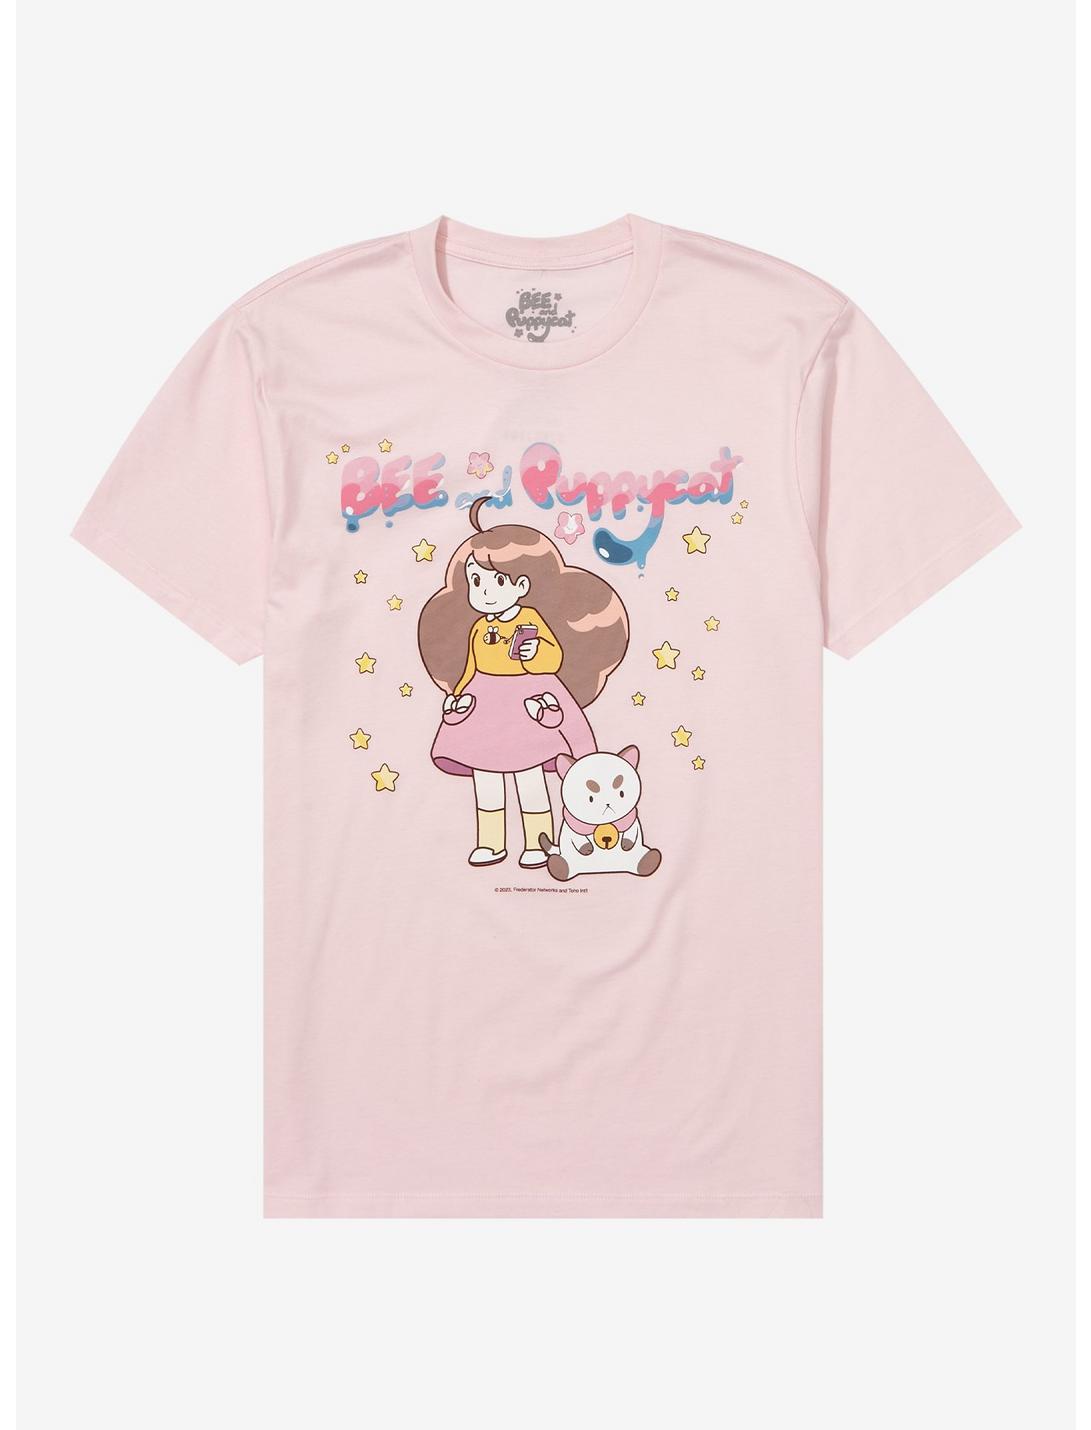 Bee and Puppycat Character Portrait Women's T-Shirt - BoxLunch Exclusive, LIGHT PINK, hi-res